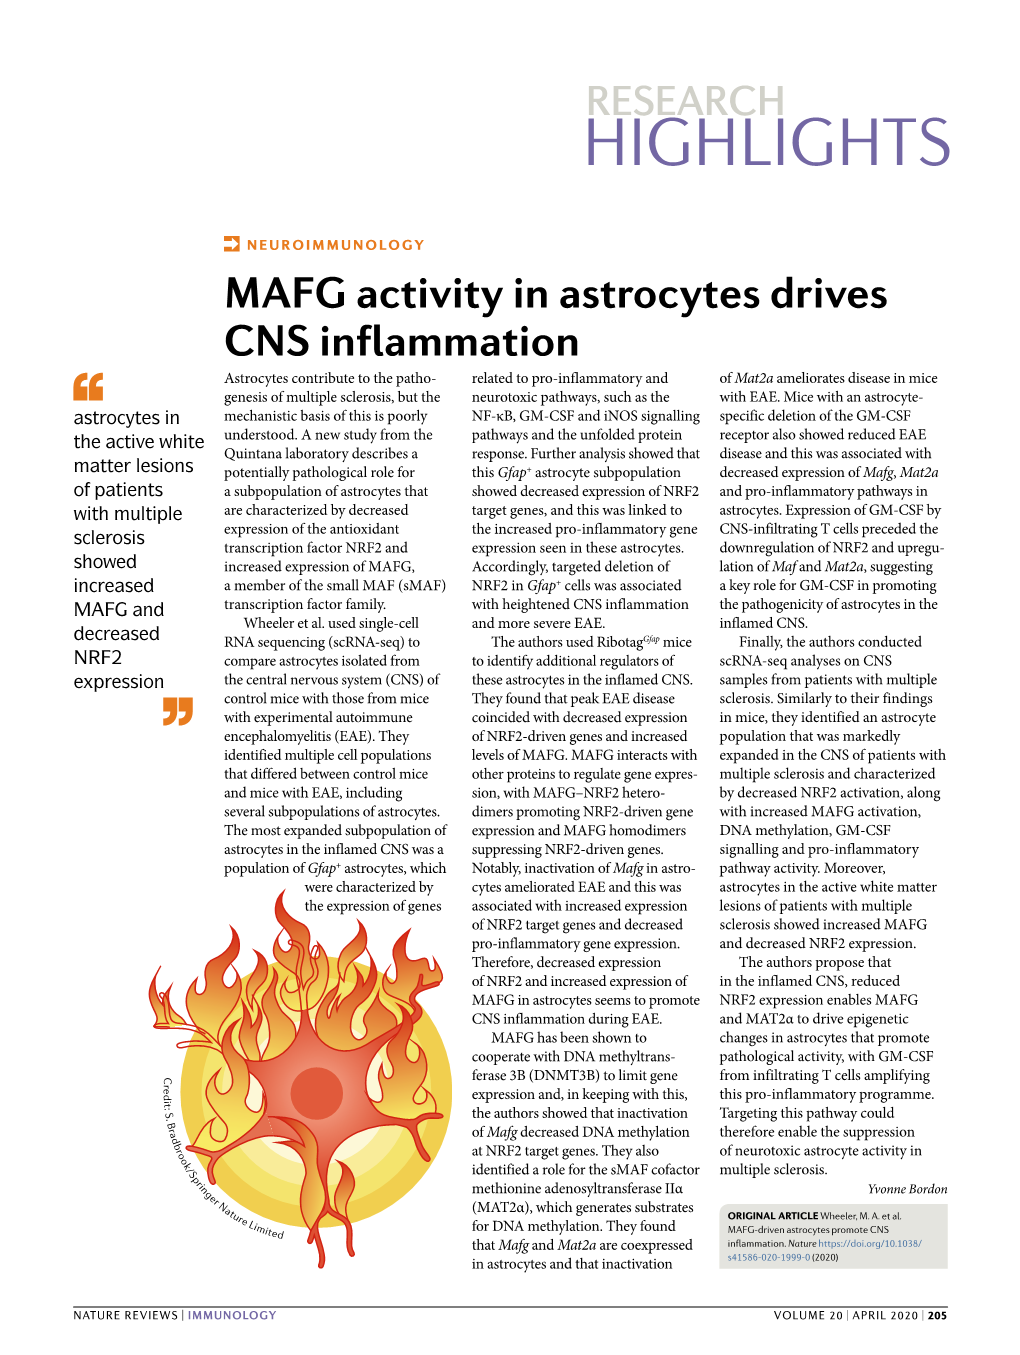 MAFG Activity in Astrocytes Drives CNS Inflammation